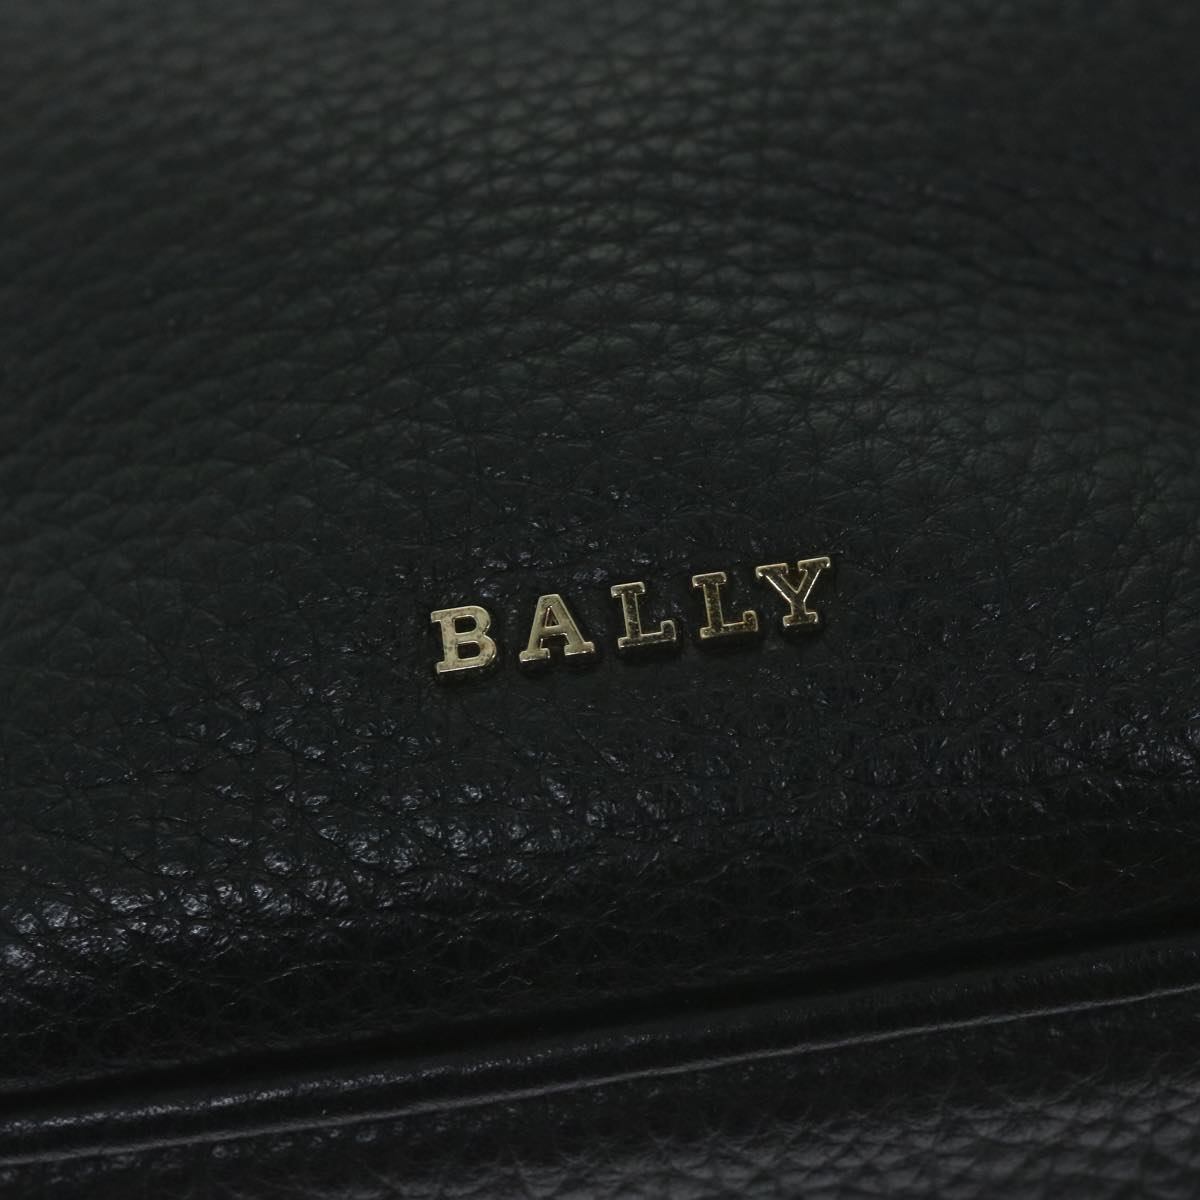 BALLY Purse Chain Shoulder Bag Leather 2way Black Red white Auth yk10562